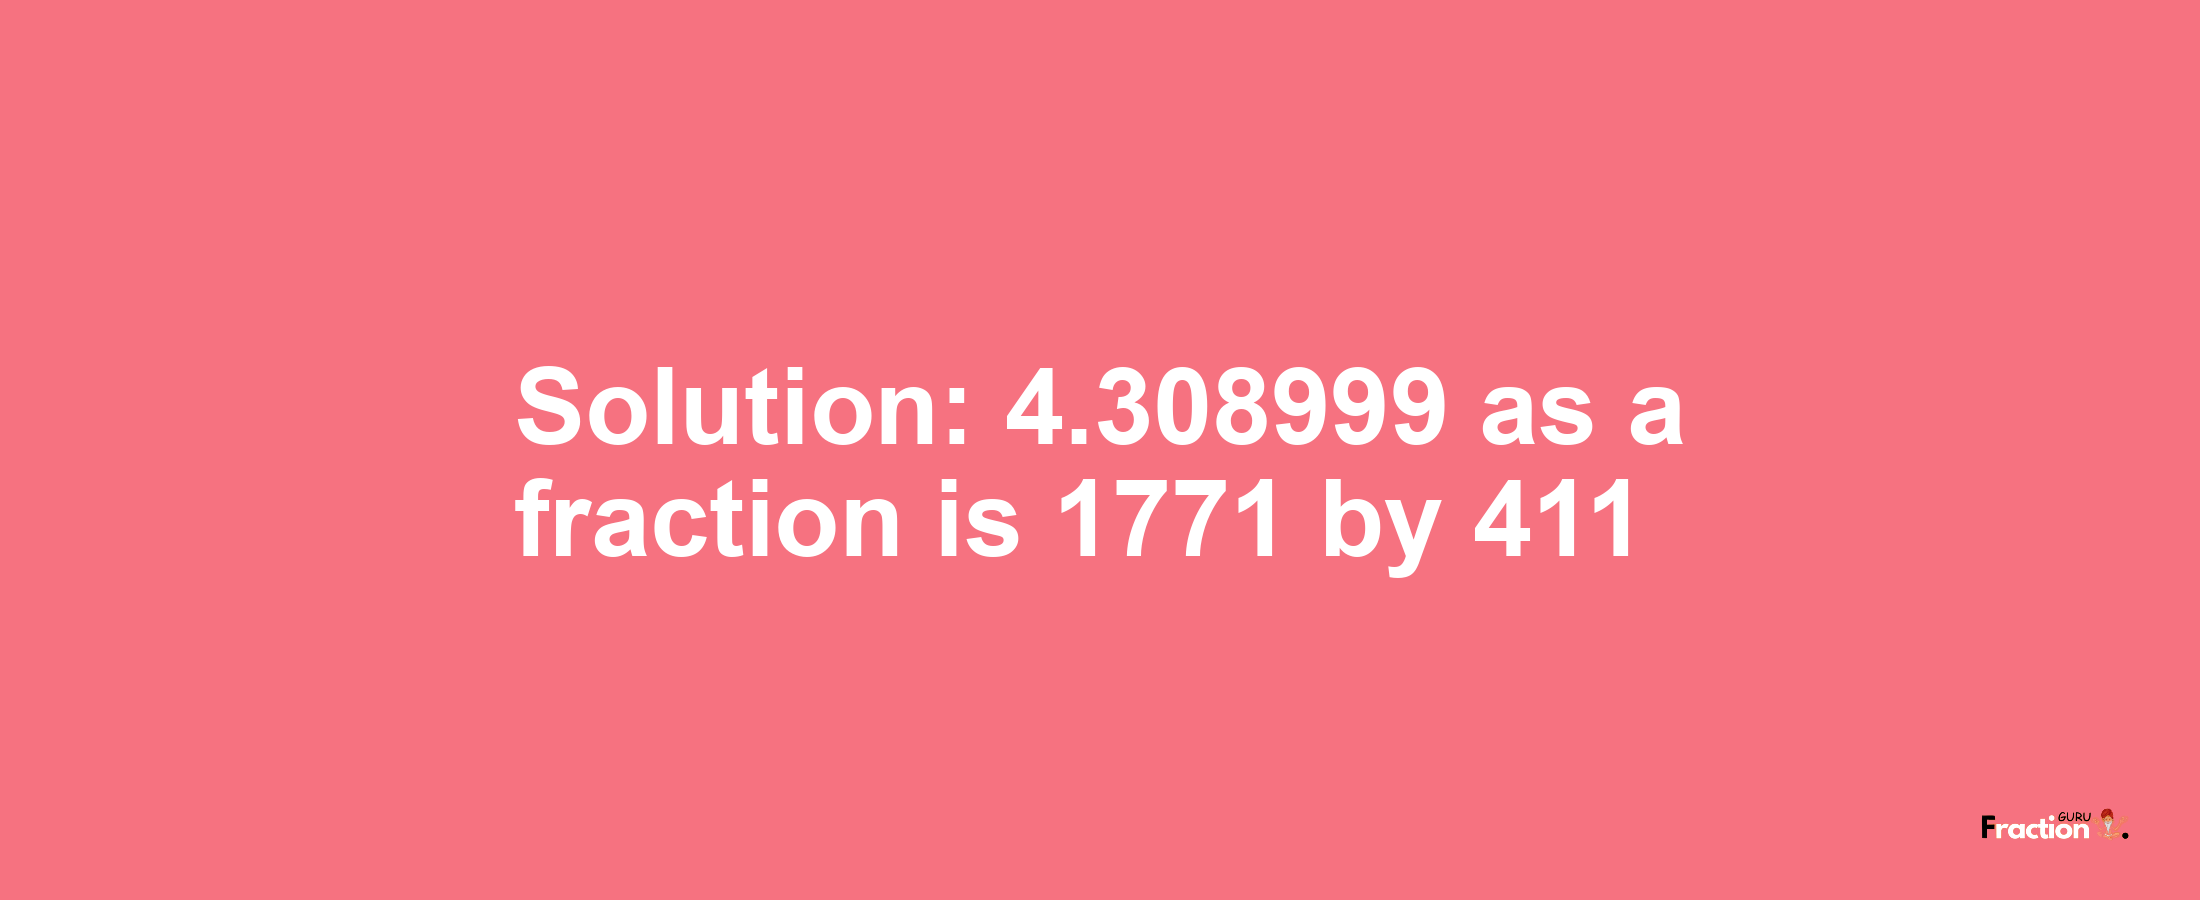 Solution:4.308999 as a fraction is 1771/411